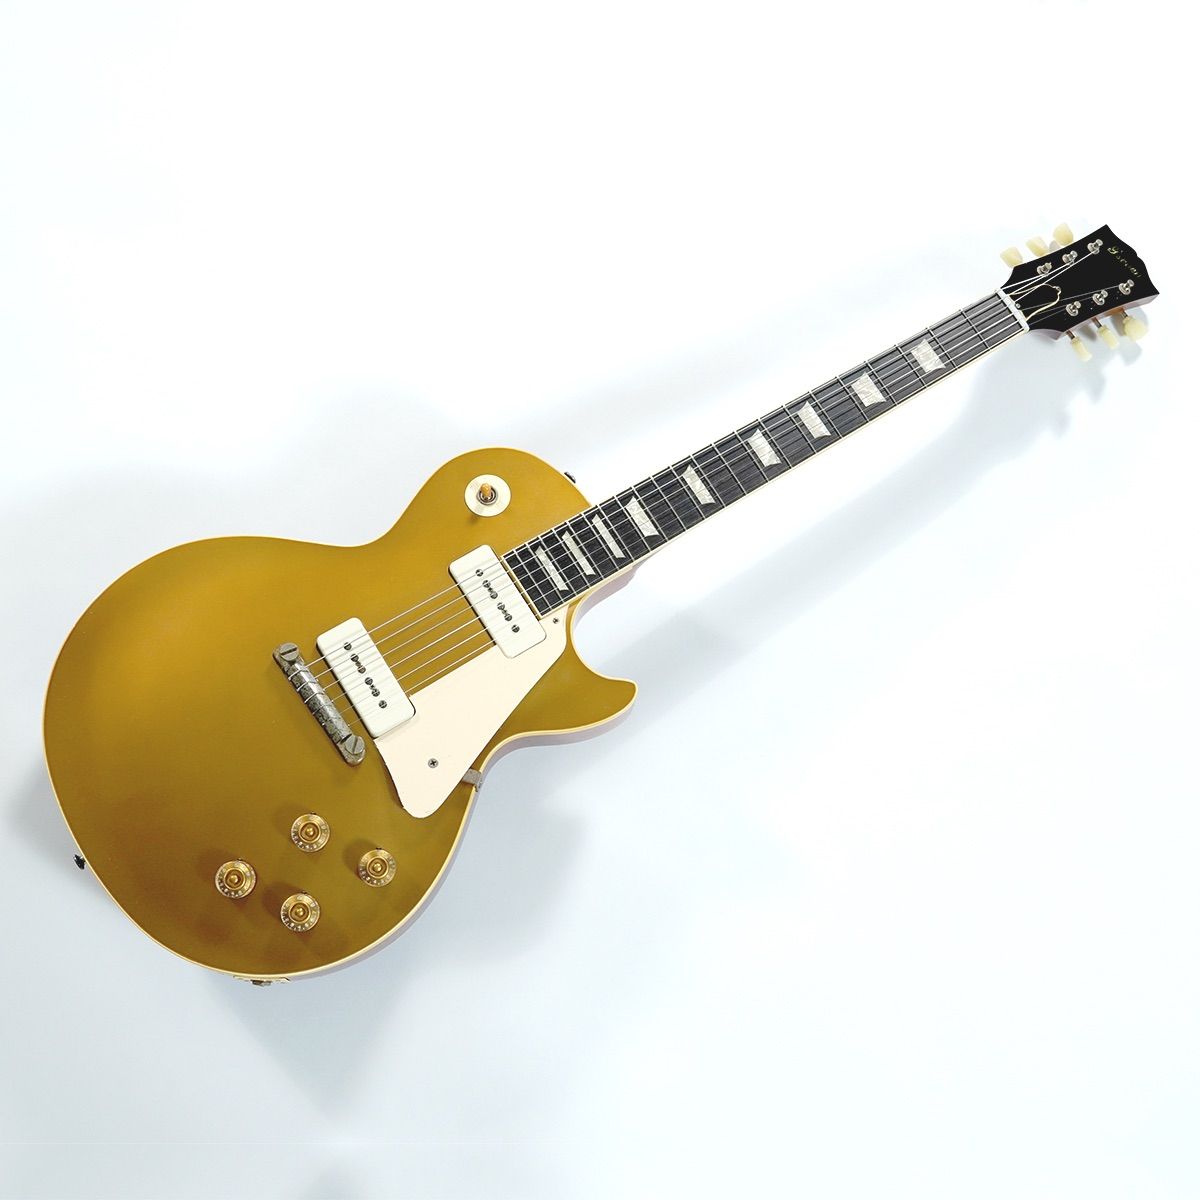 g7 Special / g7-LP54 Gold Top-1